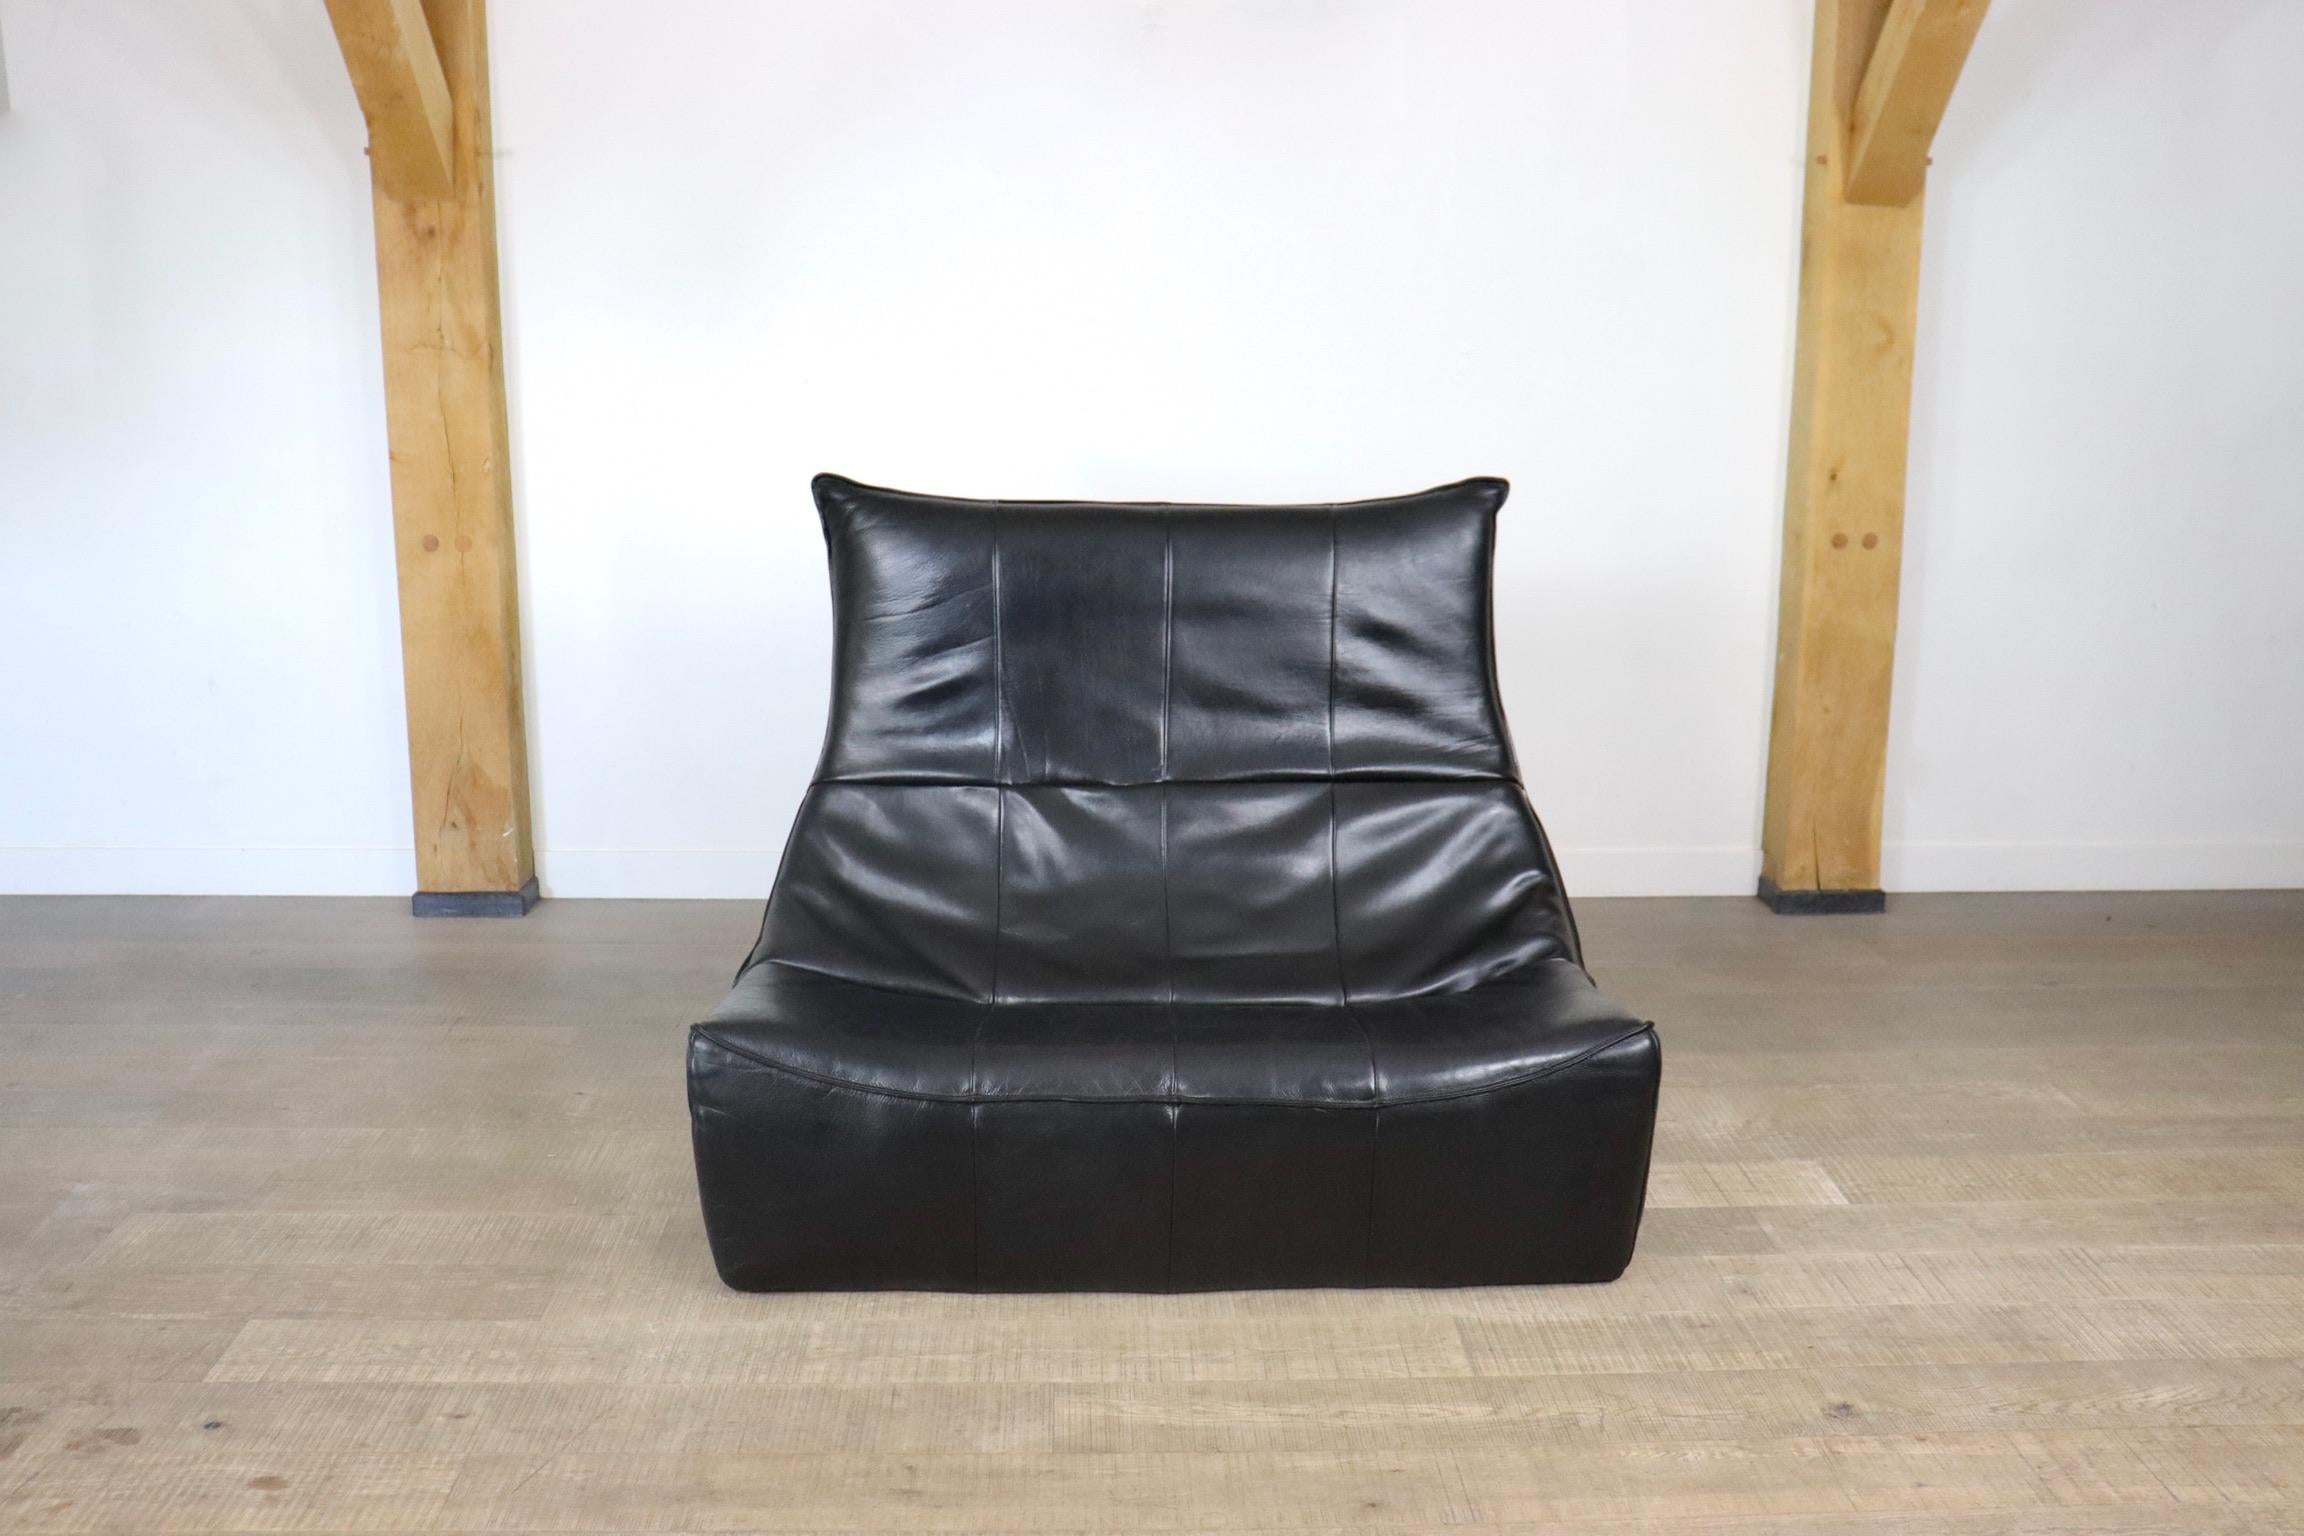 Stunning black leather 'The Rock' two seater sofa by Gerard van den Berg, for Montis 1970s. The sofa features a high quality black leather upholstery. This iconic sofa will give any space a luxurious ambience. 

Dimensions: W148 x D115 x